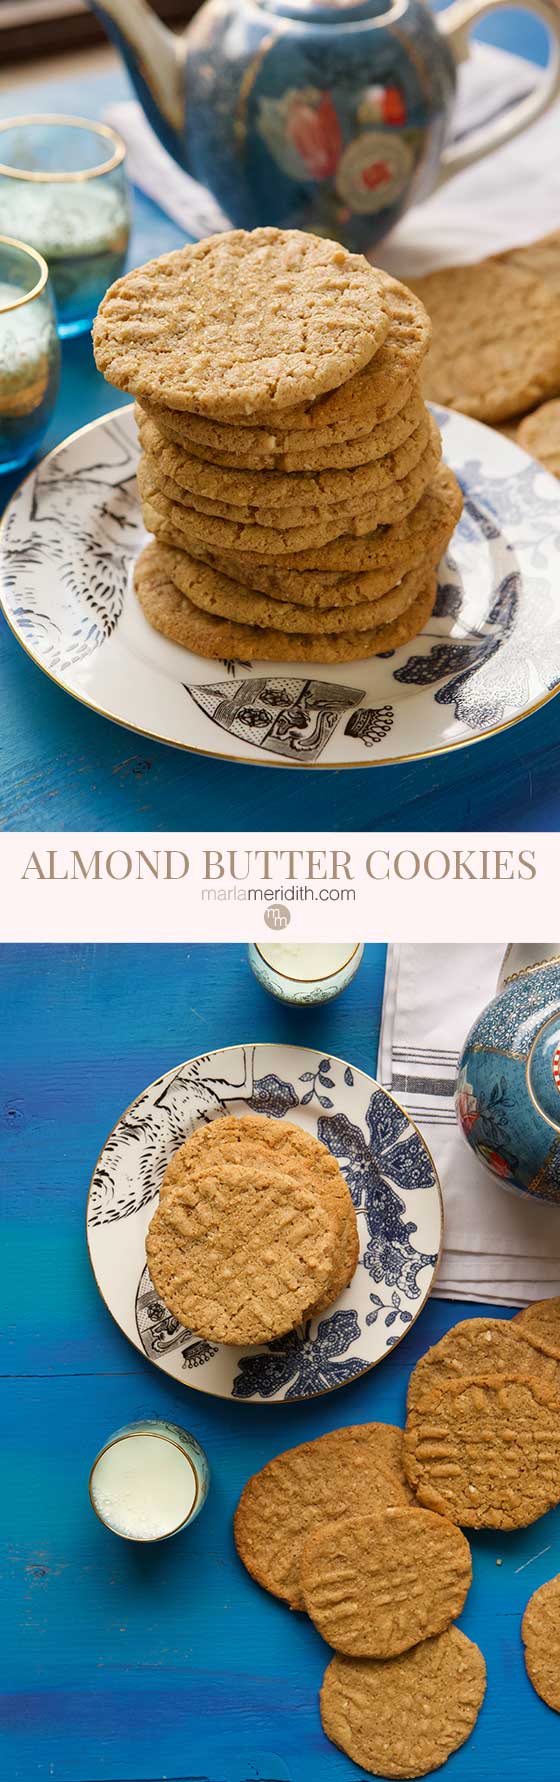 Try this Simple, Easy & Healthier Almond Butter Cookies recipe today! They are made with whole wheat pastry flour to lessen the cookie guilt! MarlaMeridith.com